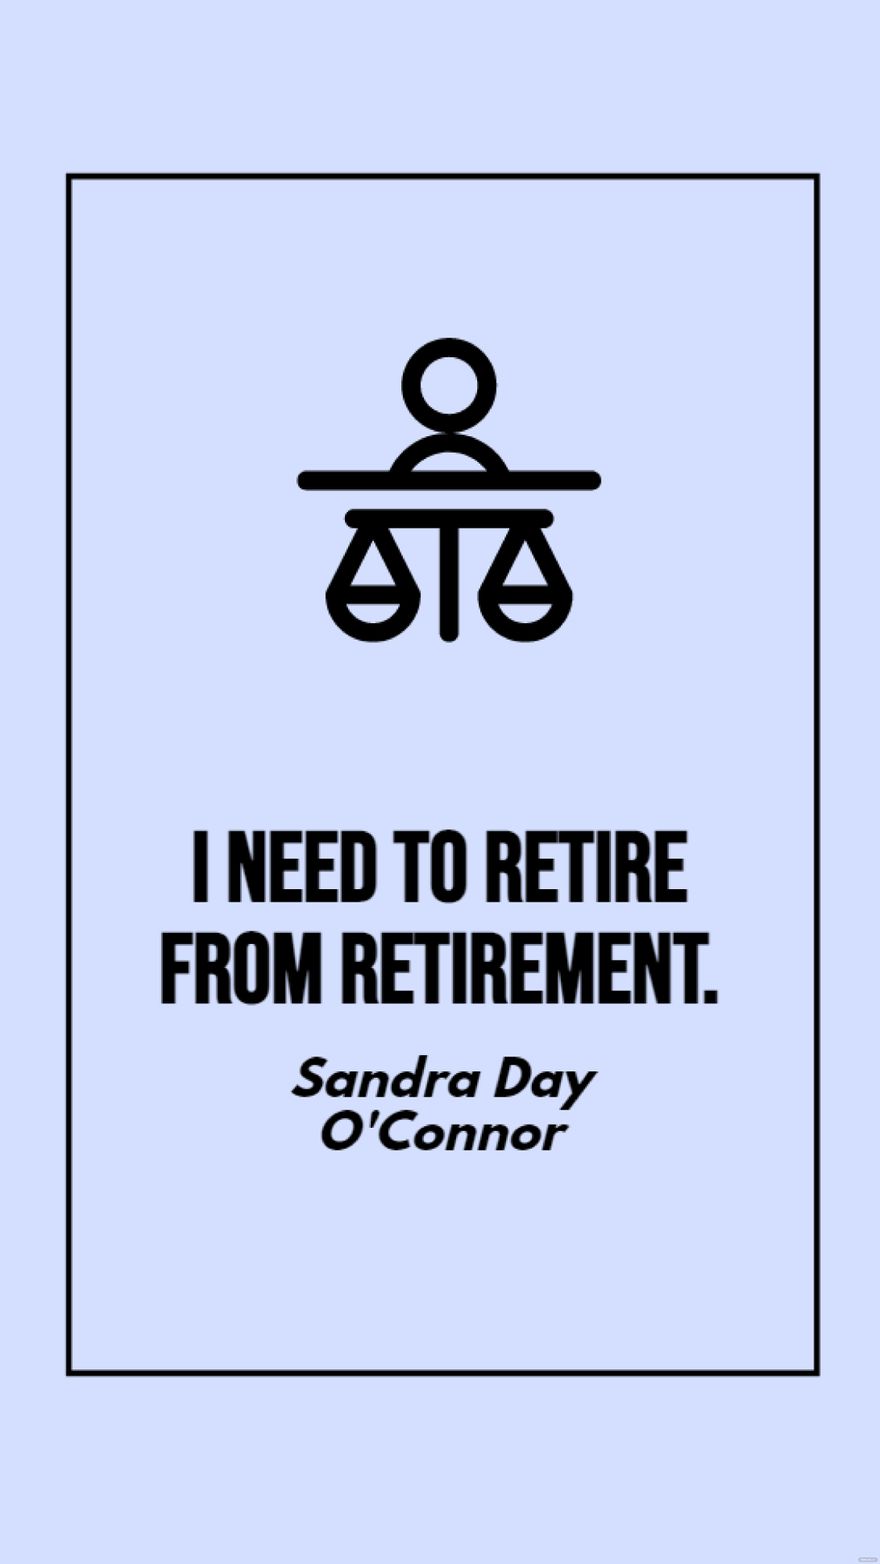 Free Sandra Day O'Connor - I need to retire from retirement.